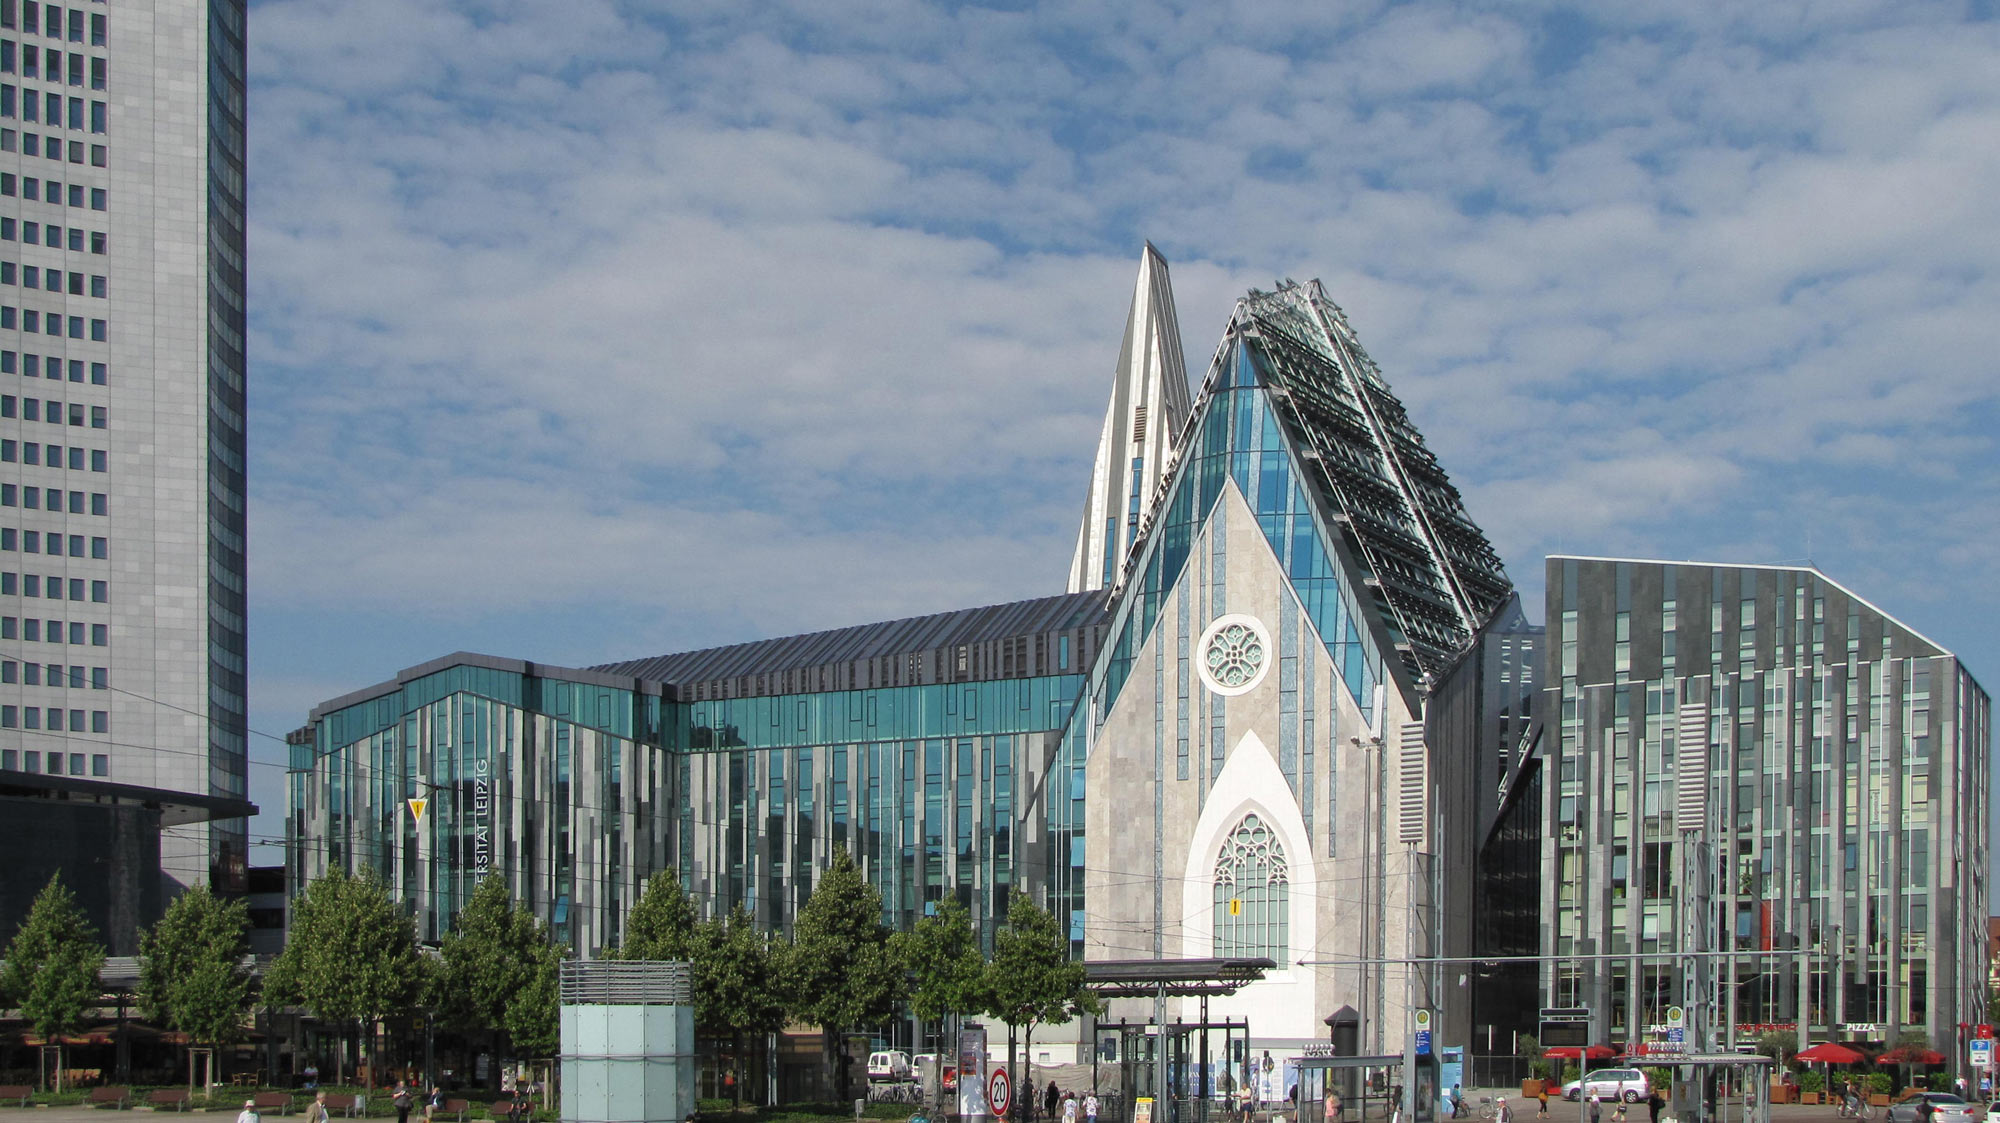 The Paulinum in Leipzig, completed in 2007. It stands at the site of the former Pauliner Kirche, the Leipzig University church, which was destroyed in 1968 during the communist regime of East Germany. Bach performed many cantatas in the Pauliner Kirche.